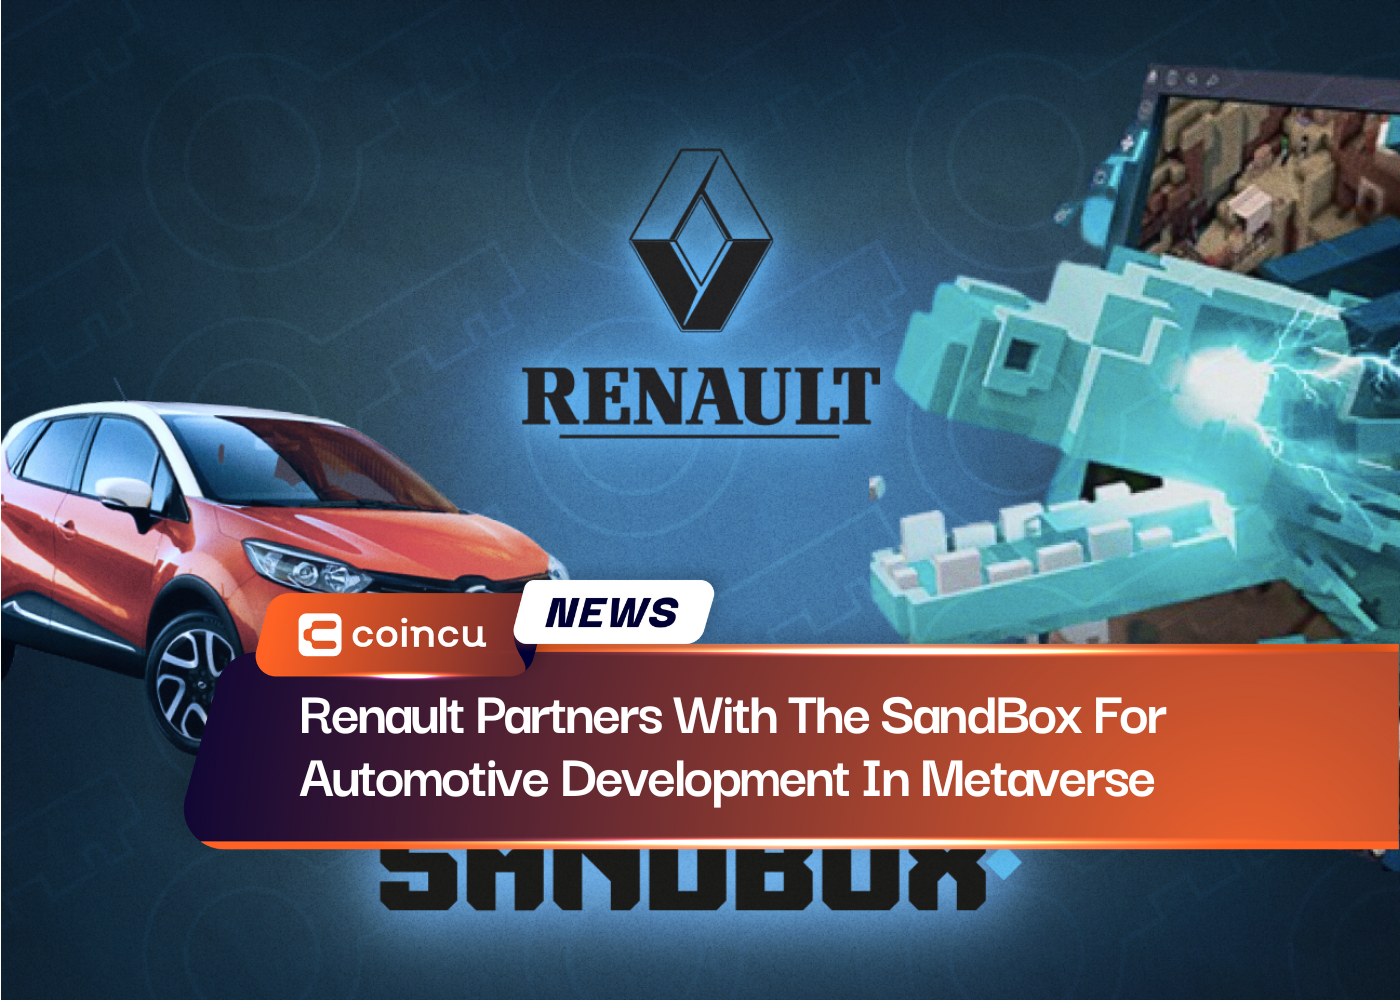 Renault Partners With The SandBox For Automotive Development In Metaverse